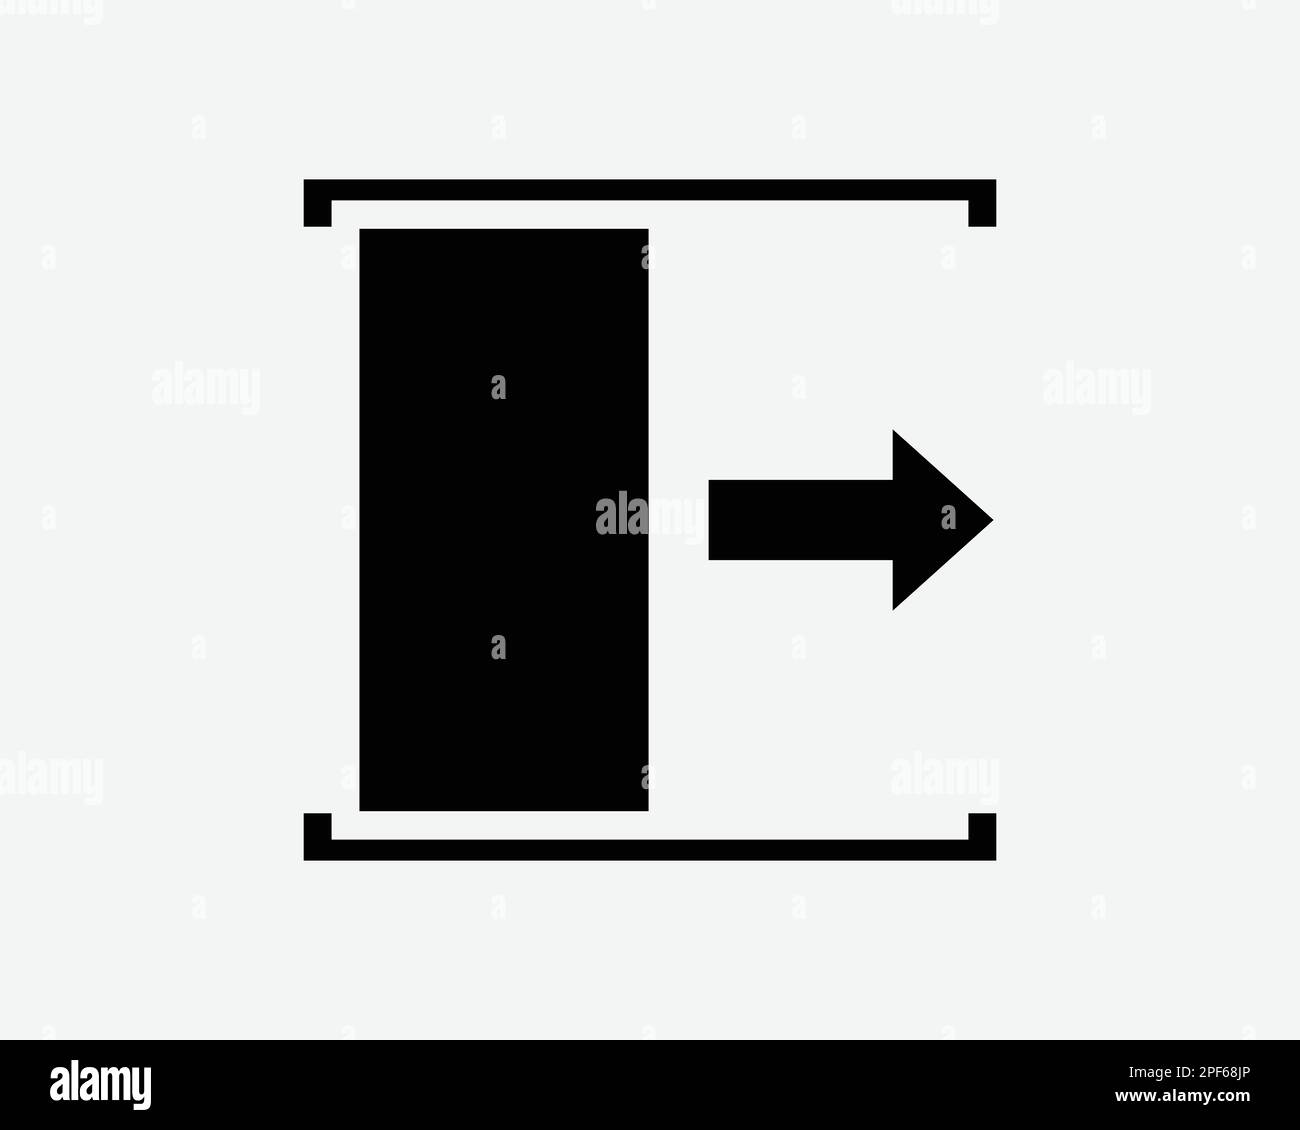 Sliding Door Open Right Side Exit Path Arrow Signage Black White Silhouette Sign Symbol Icon Graphic Clipart Artwork Illustration Pictogram Vector Stock Vector